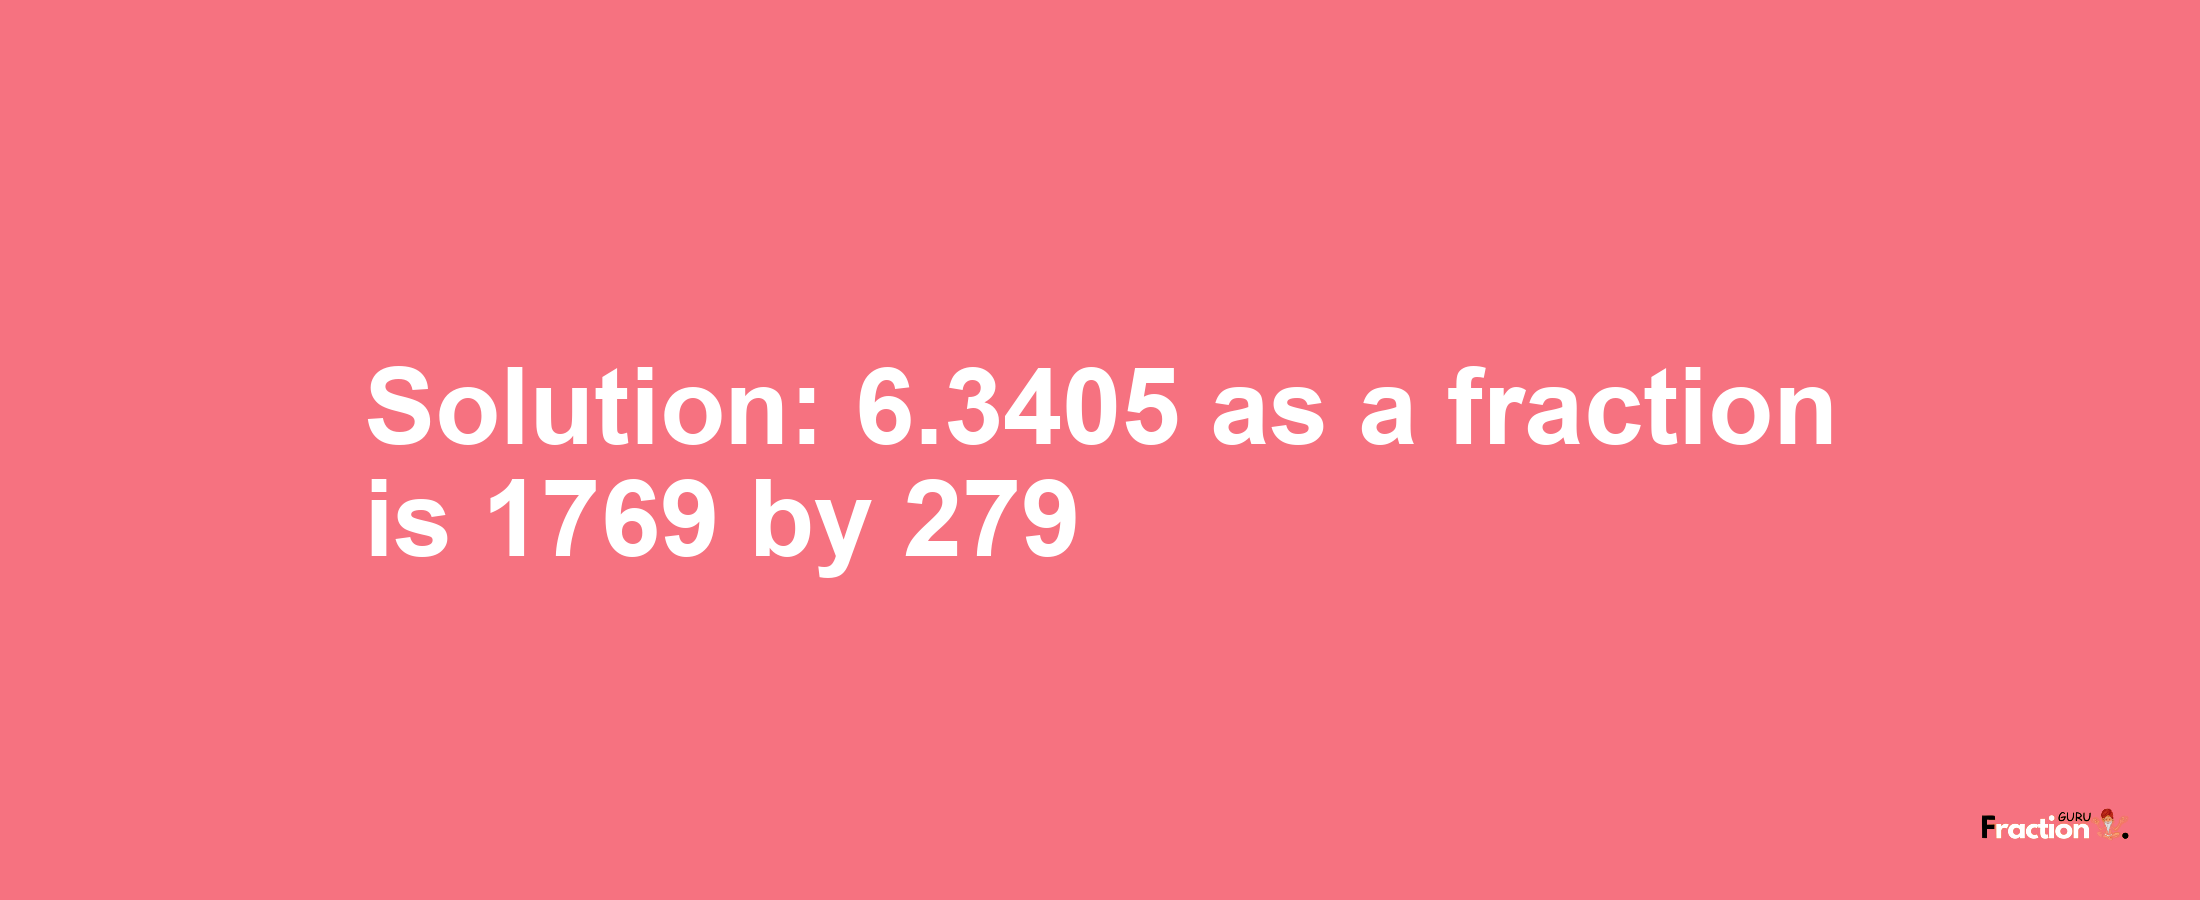 Solution:6.3405 as a fraction is 1769/279